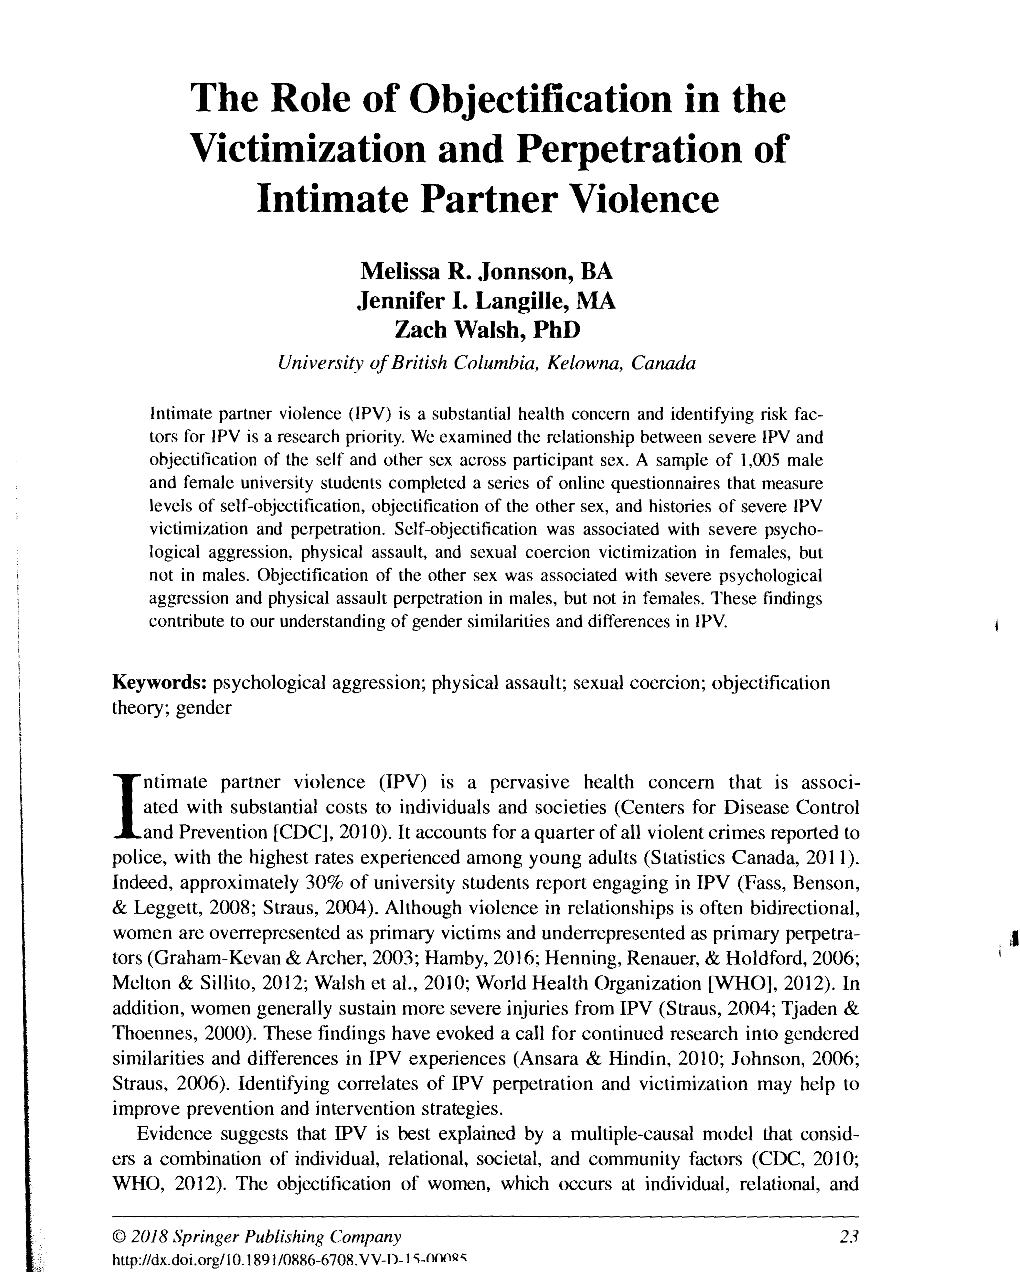 The Role of Objectification in the Victimization and Perpetration Of